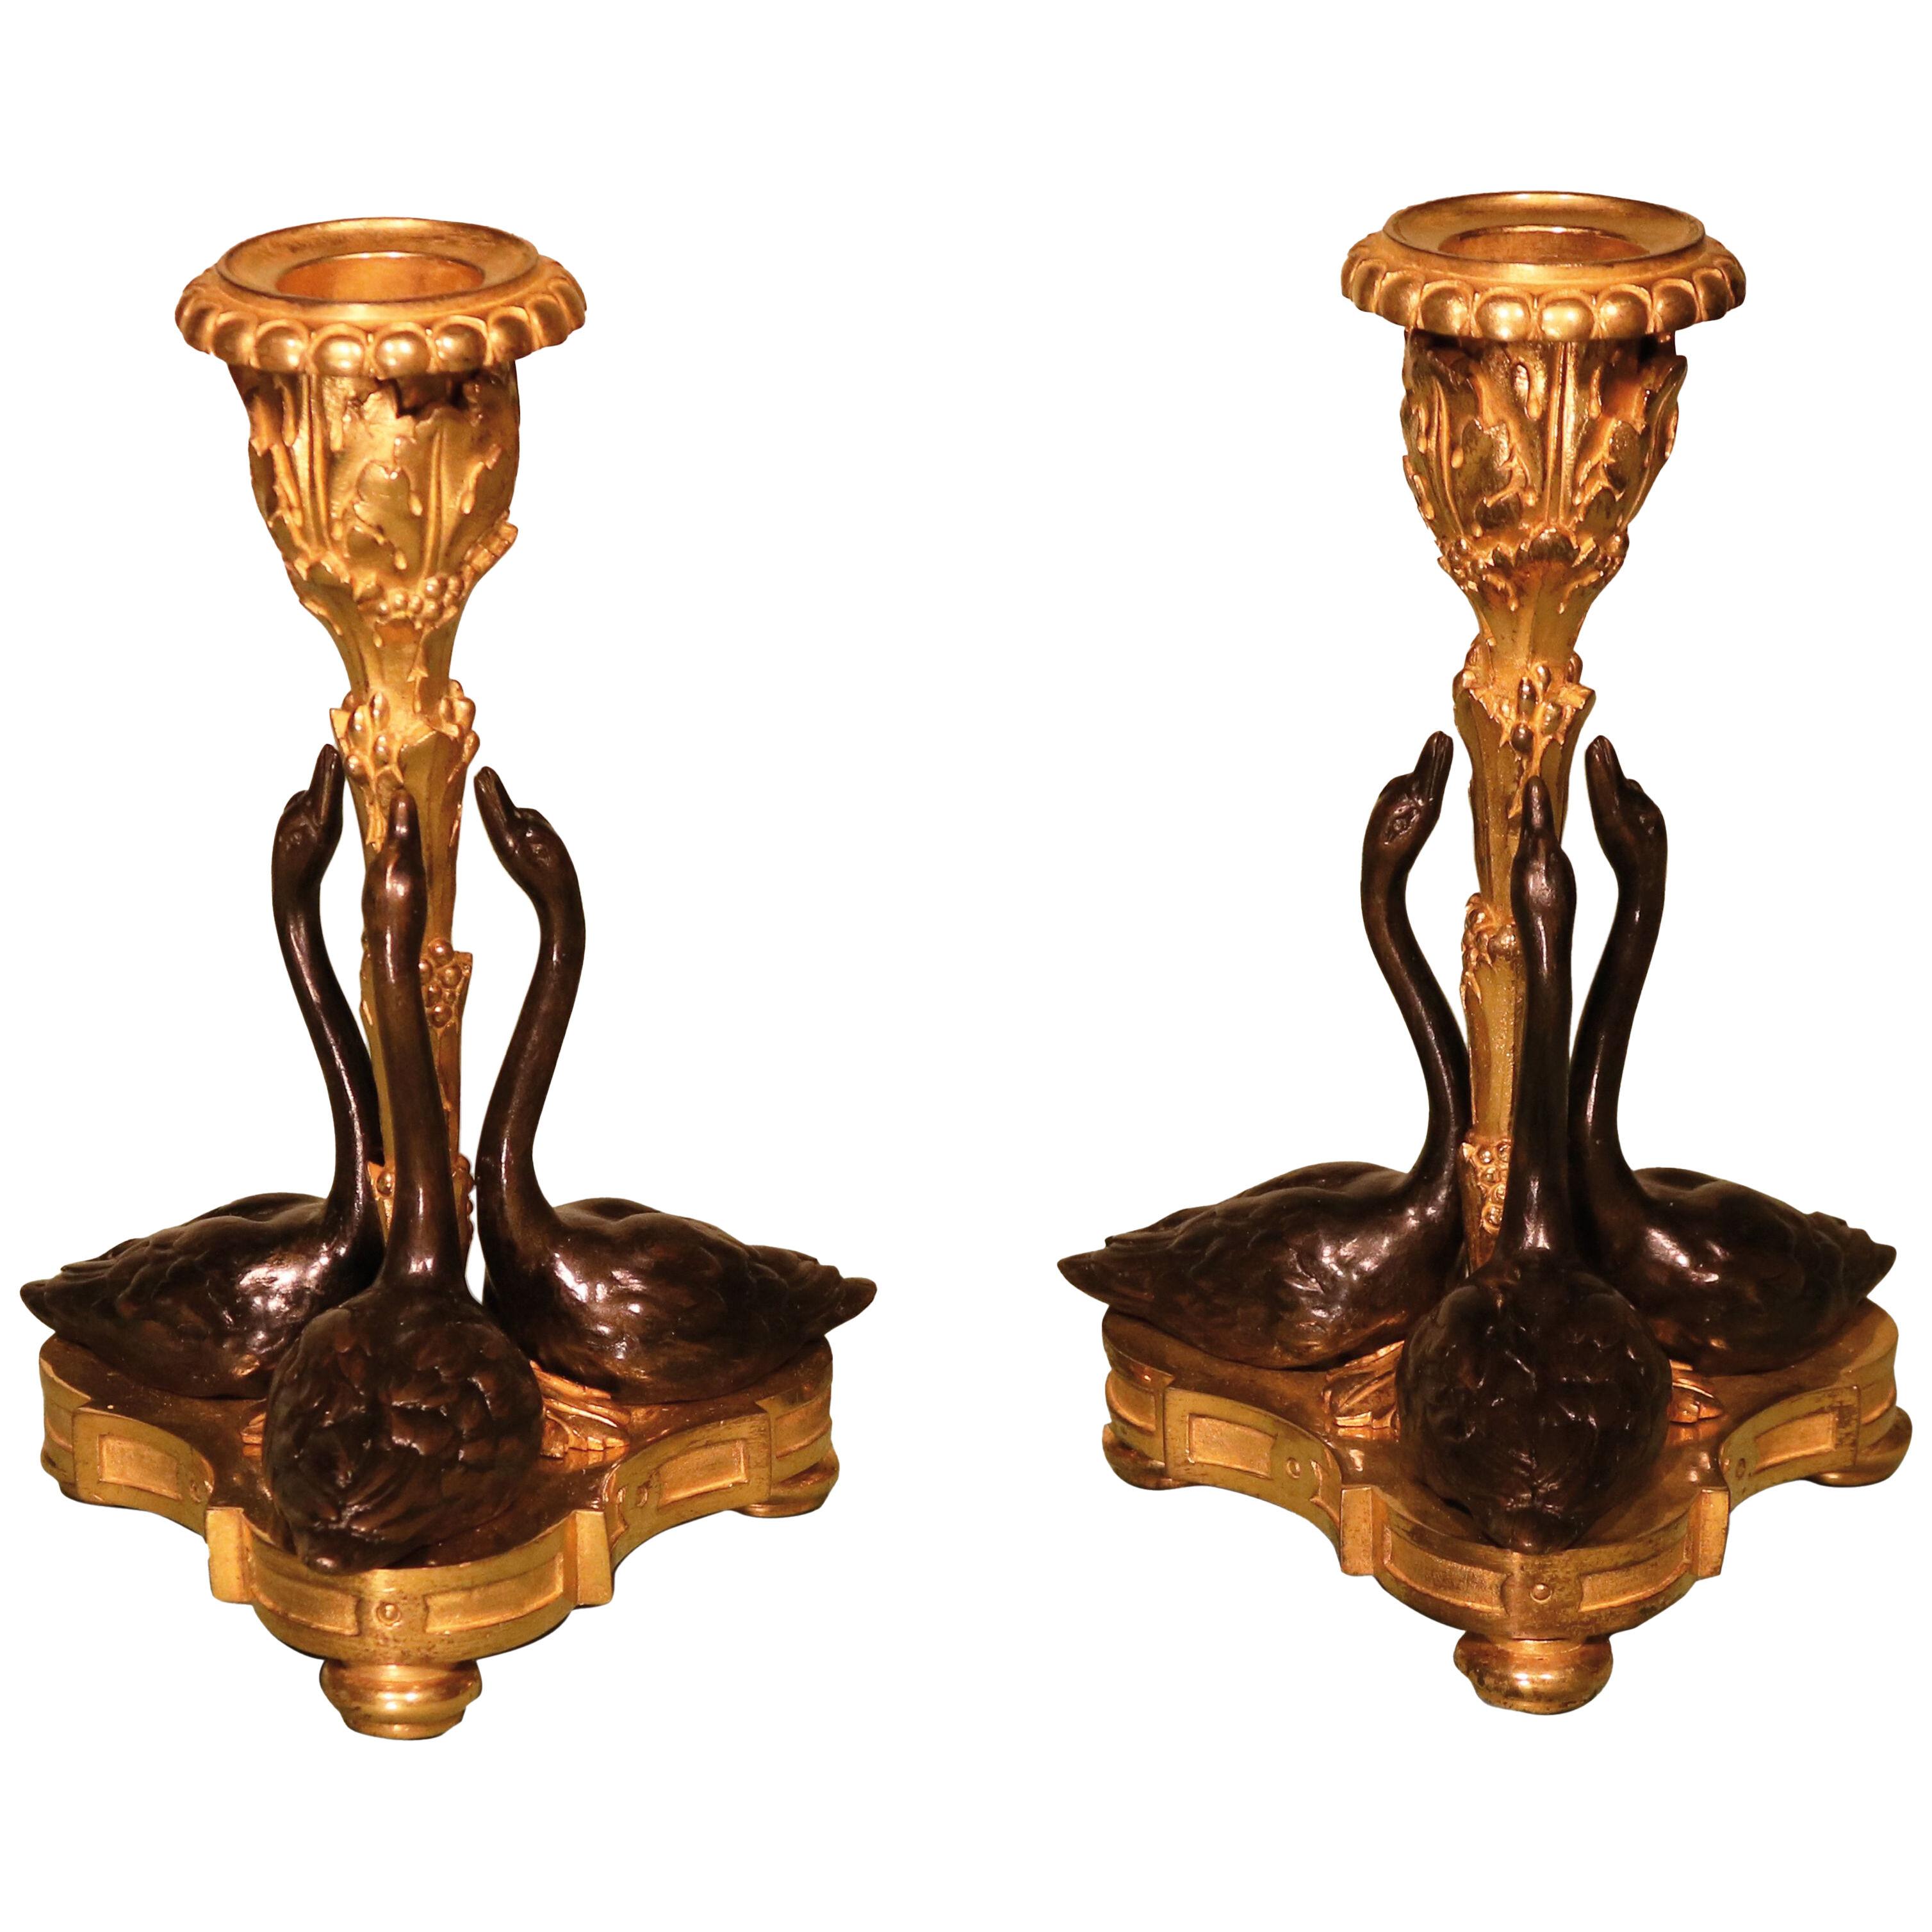 A pair of 19th century bronze and ormolu swan candlesticks